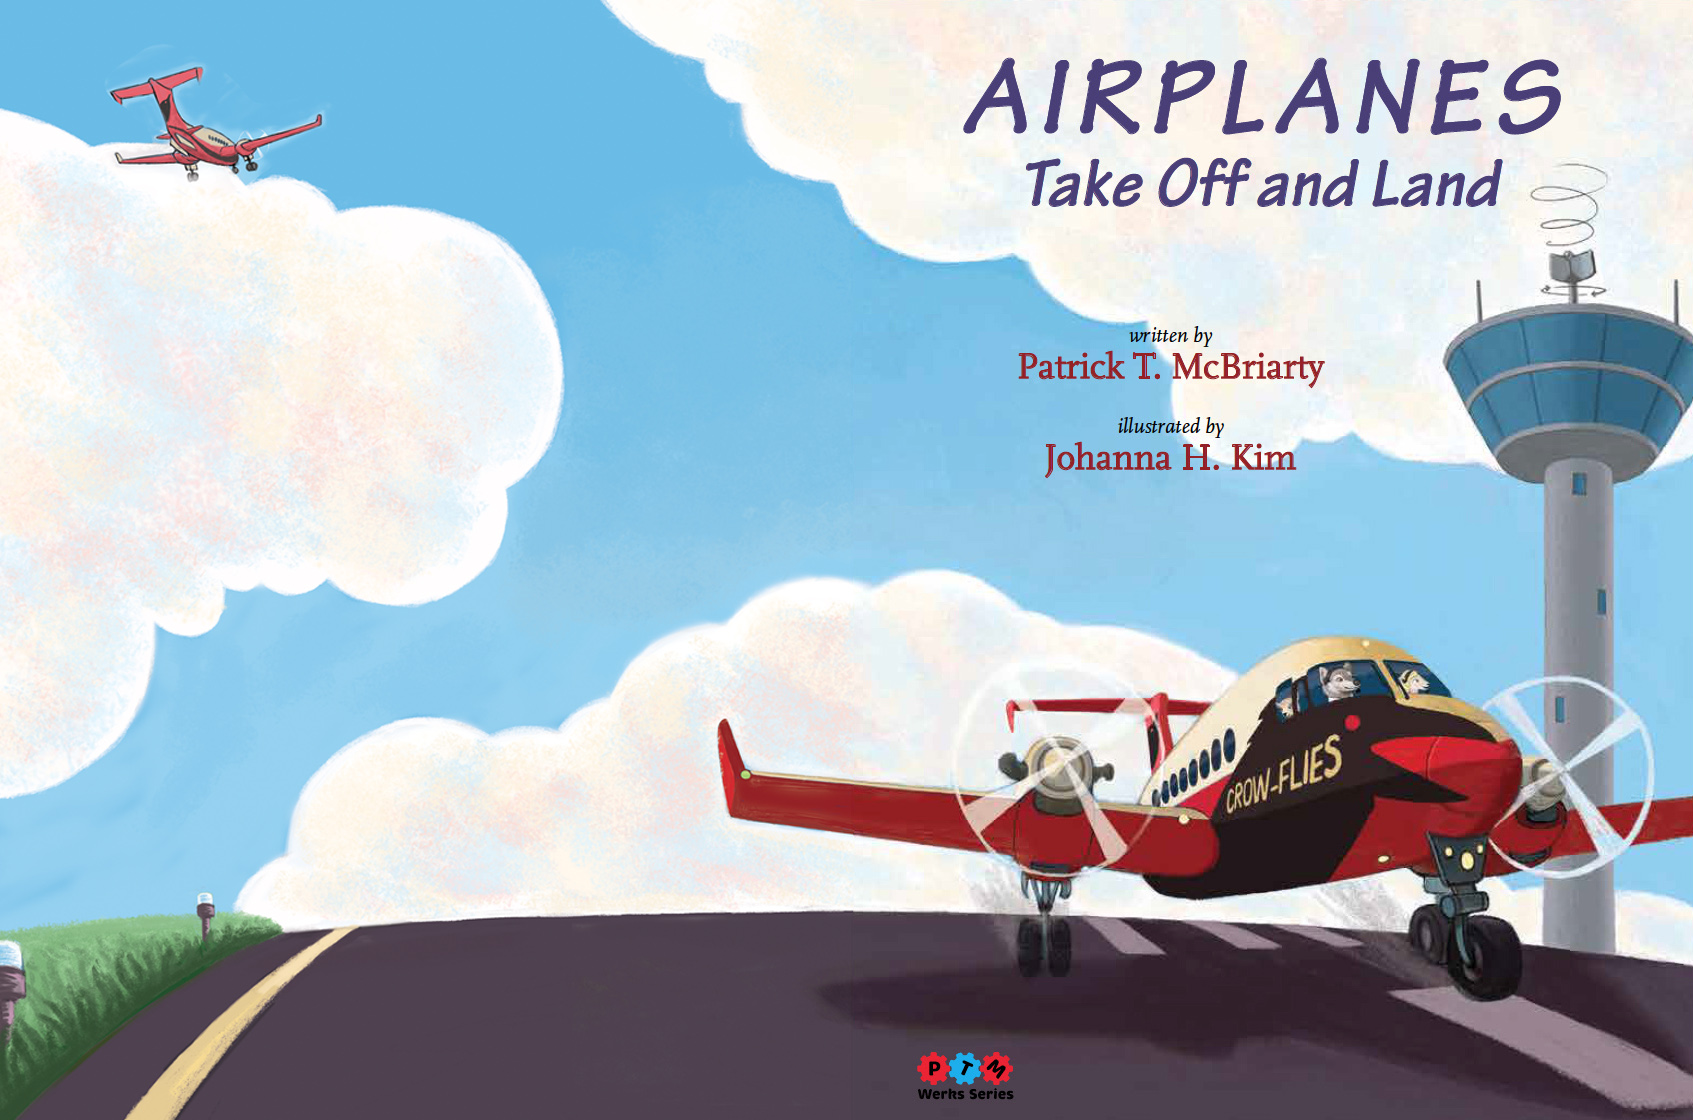 Airplanes book cover.jpg